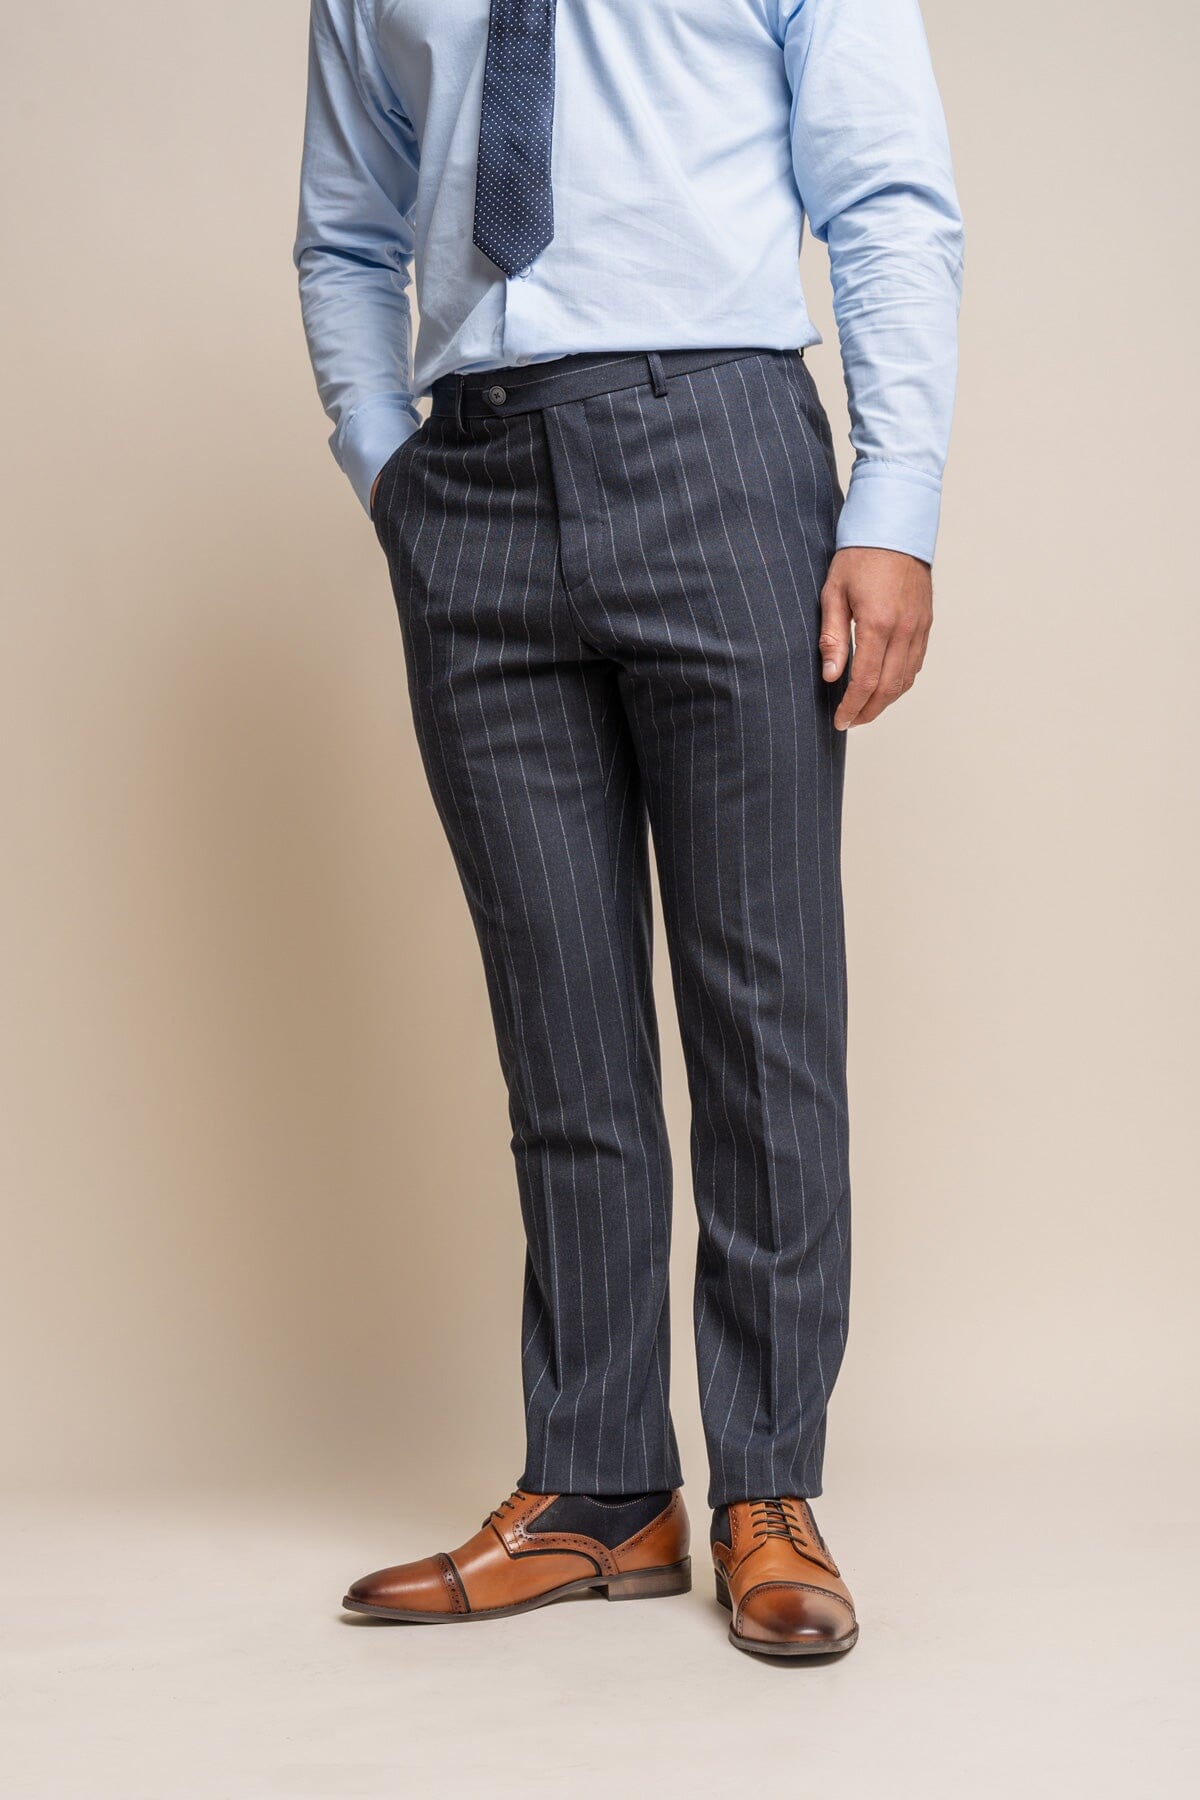 Invincible Navy Pinstripe Trousers - Trousers - 28R 